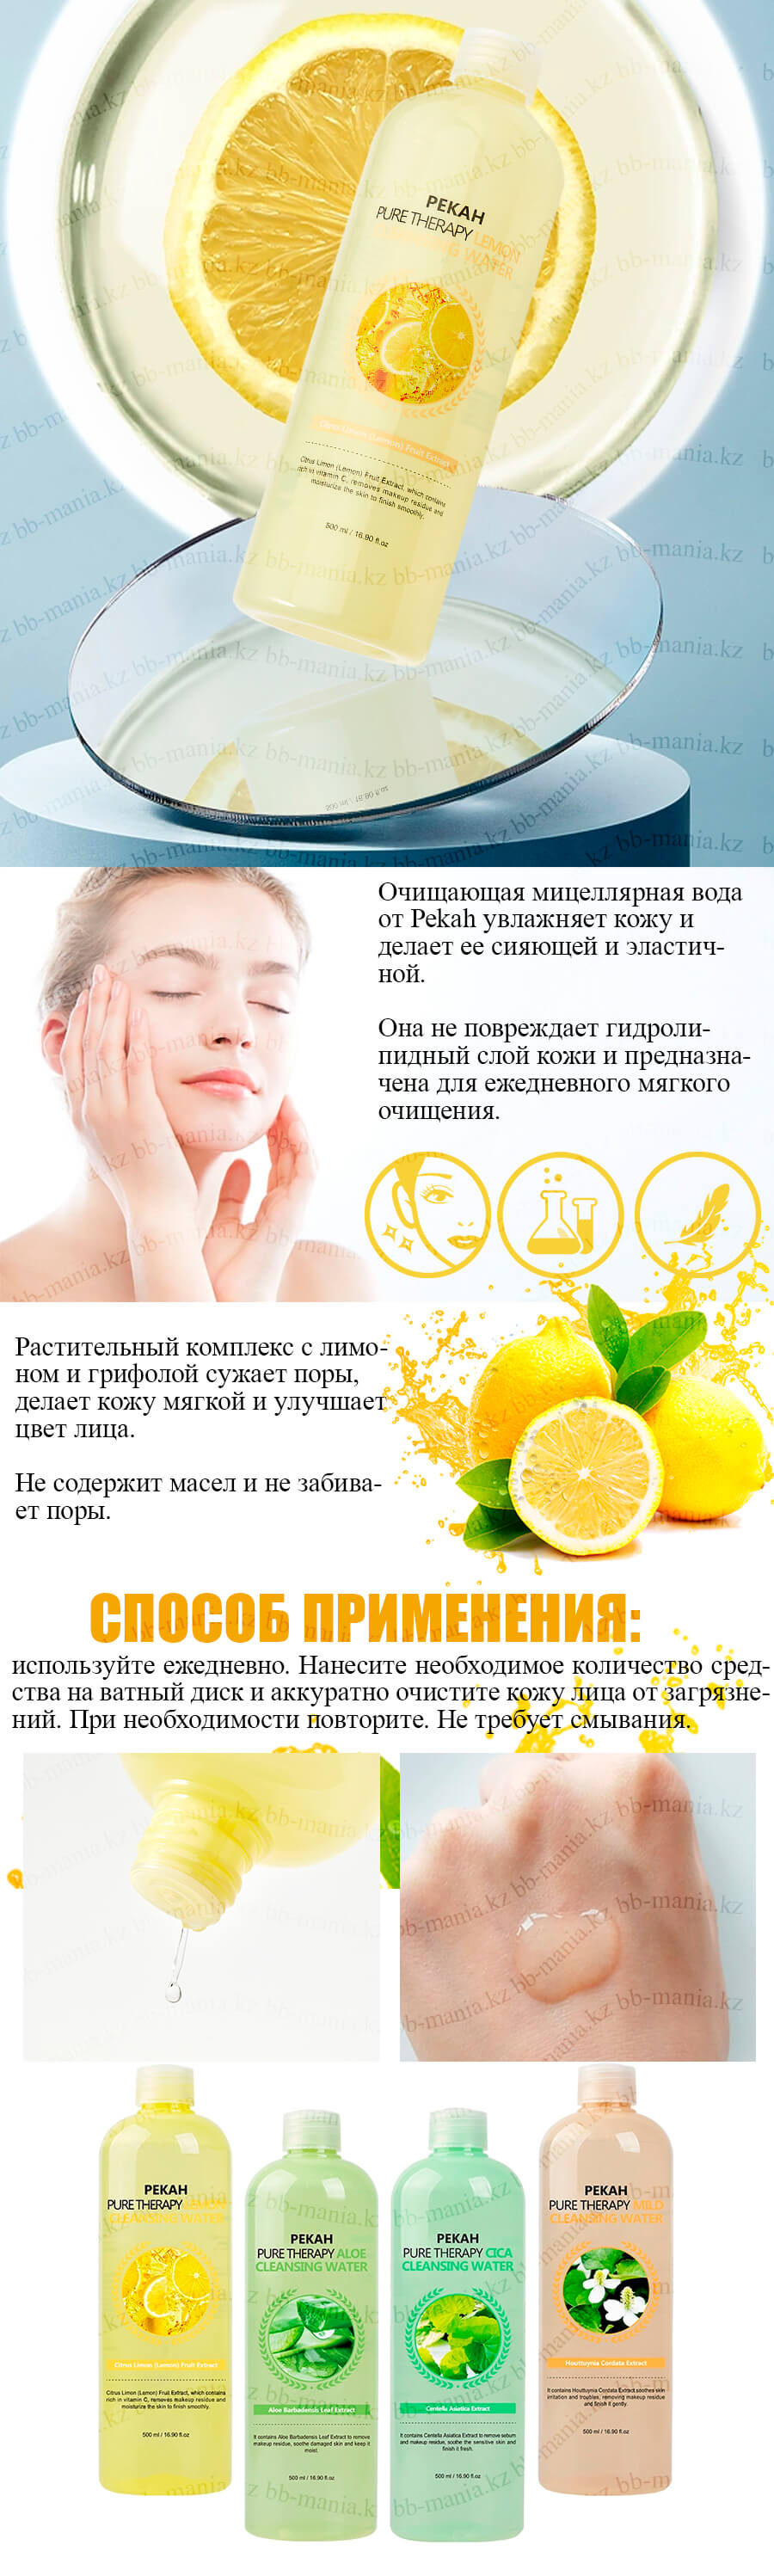 Pure Therapy Cleansing Water Lemon [Pekah] (1)